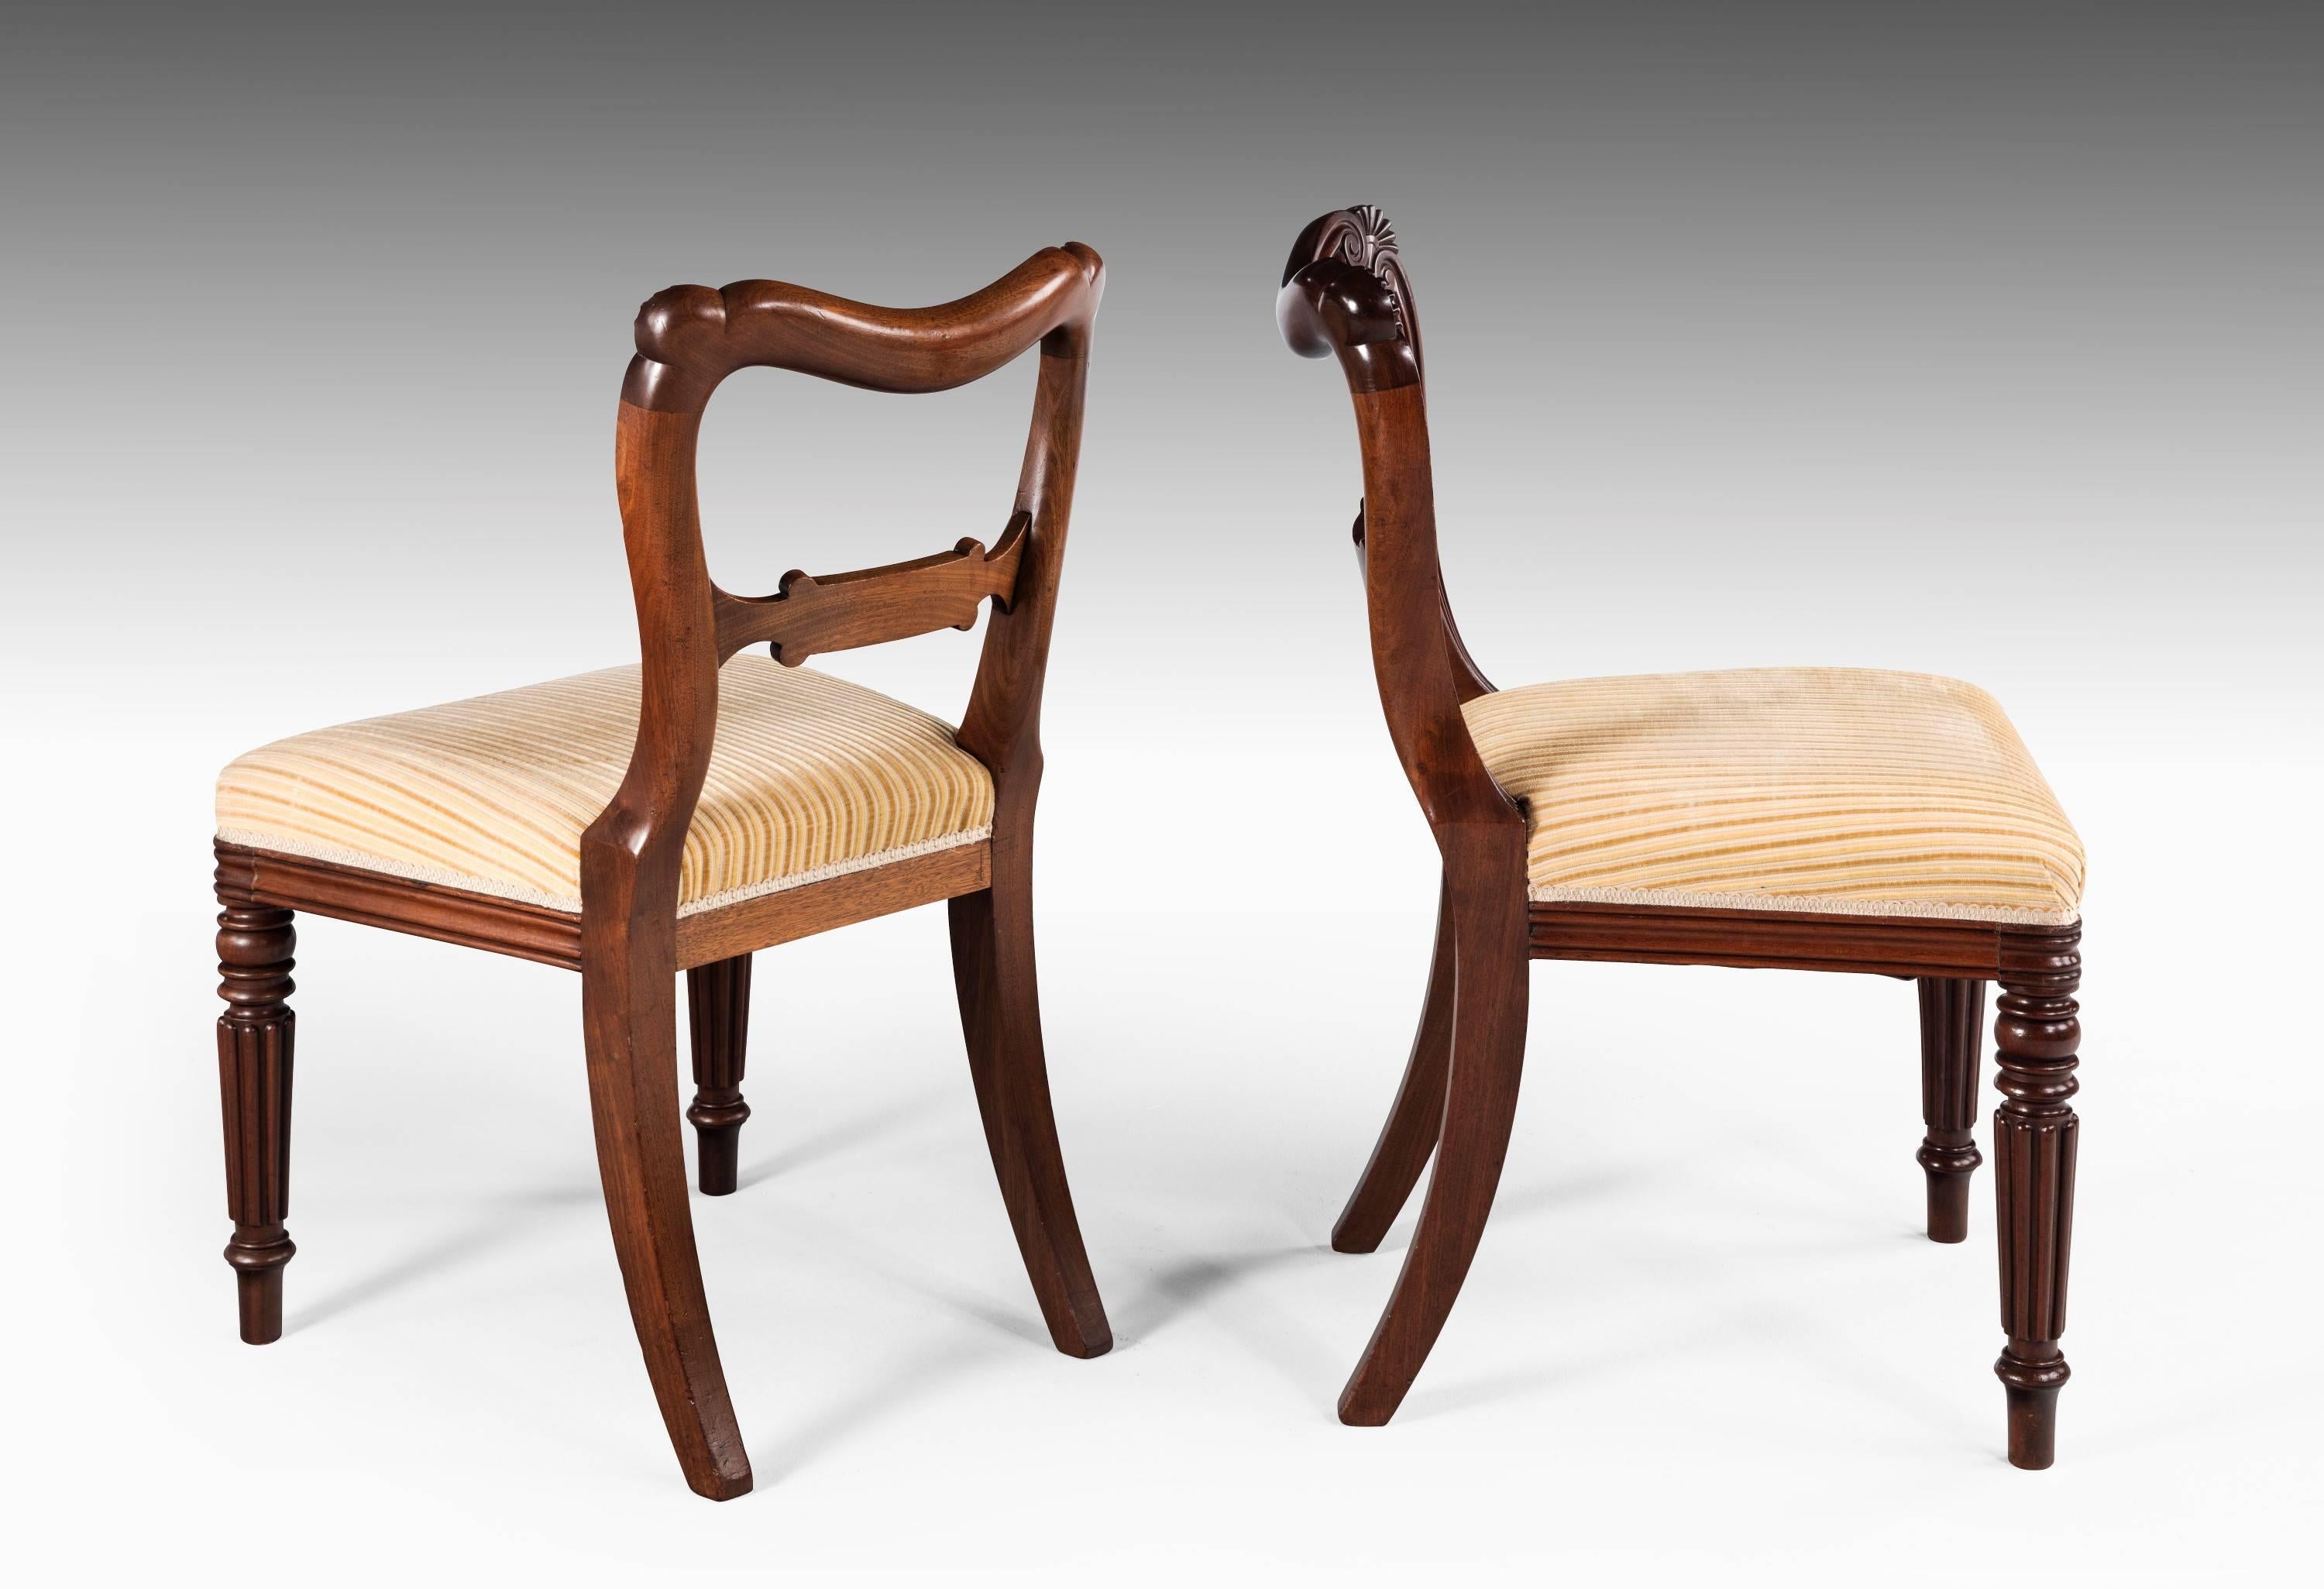 A fine set of 12 late Regency period mahogany chairs. Almost certainly by Gillows of Lancaster. Crisply carved decoration on finely turned reeded supports. Eight of the chairs circa 1825 and four of a later date.